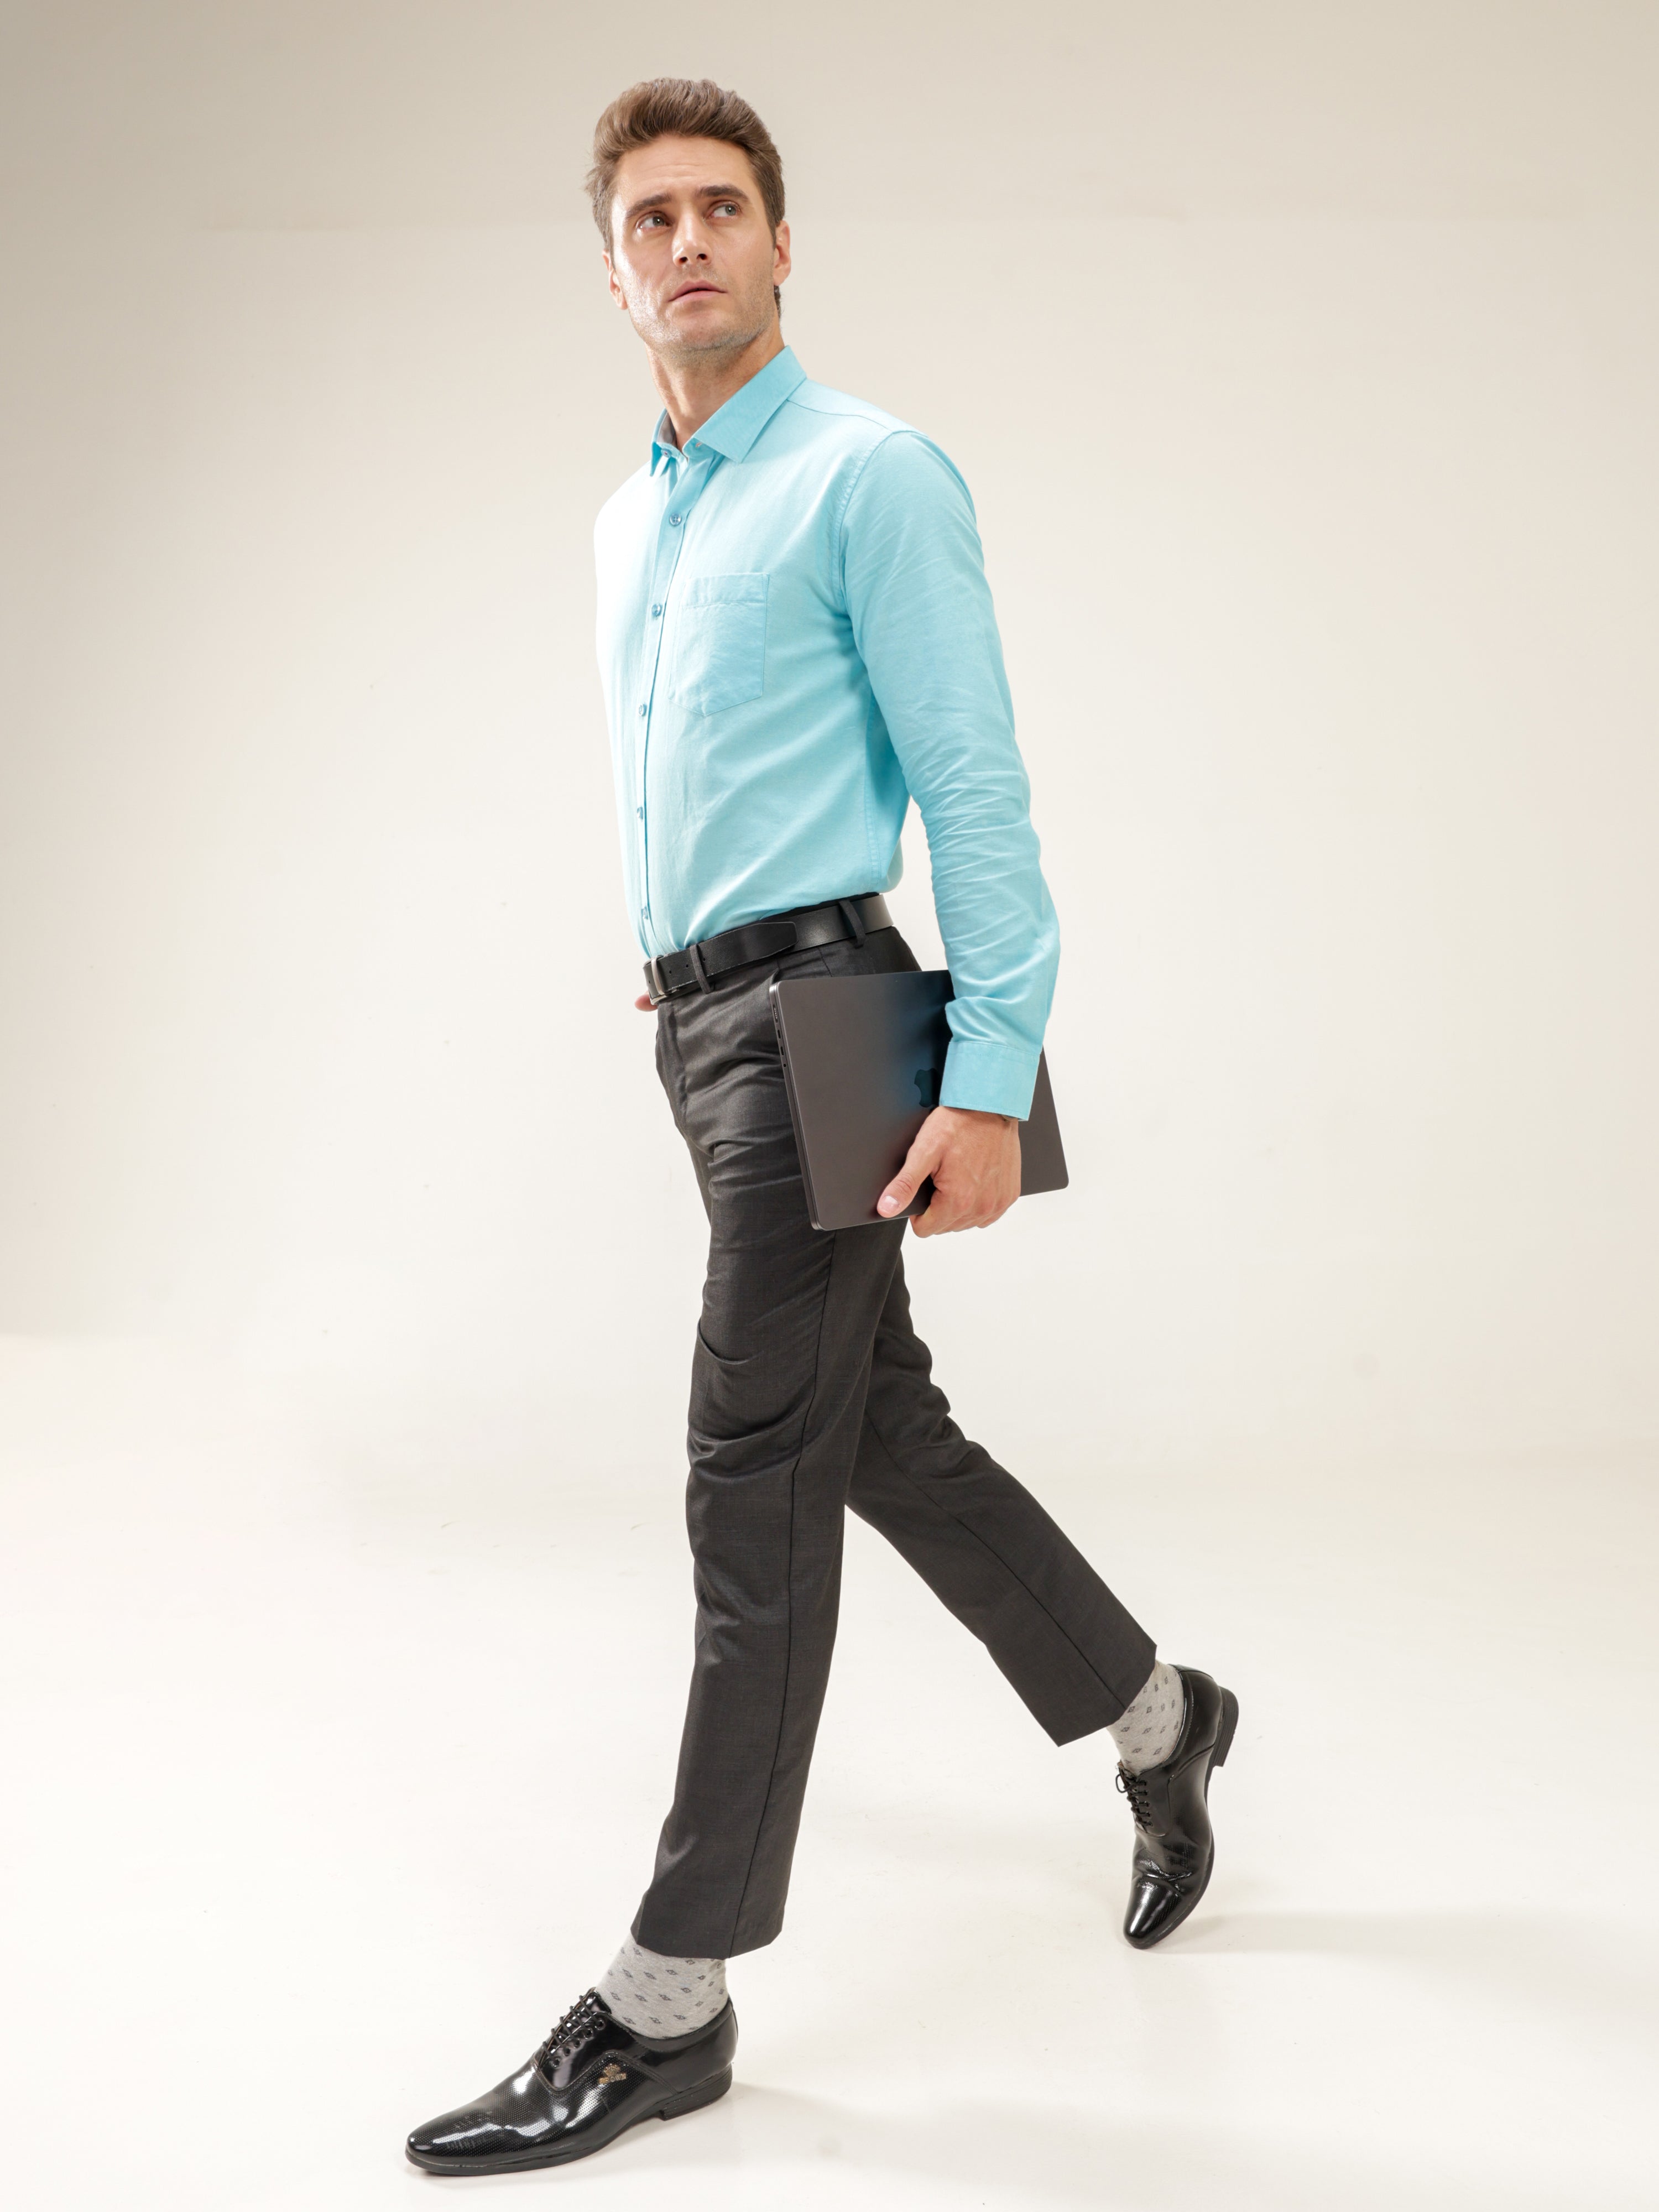 Man wearing Turquoise Oasis Oxford Turms shirt, premium menswear, casual and office wear, stylish and water-resistant anti-stain shirt for men.